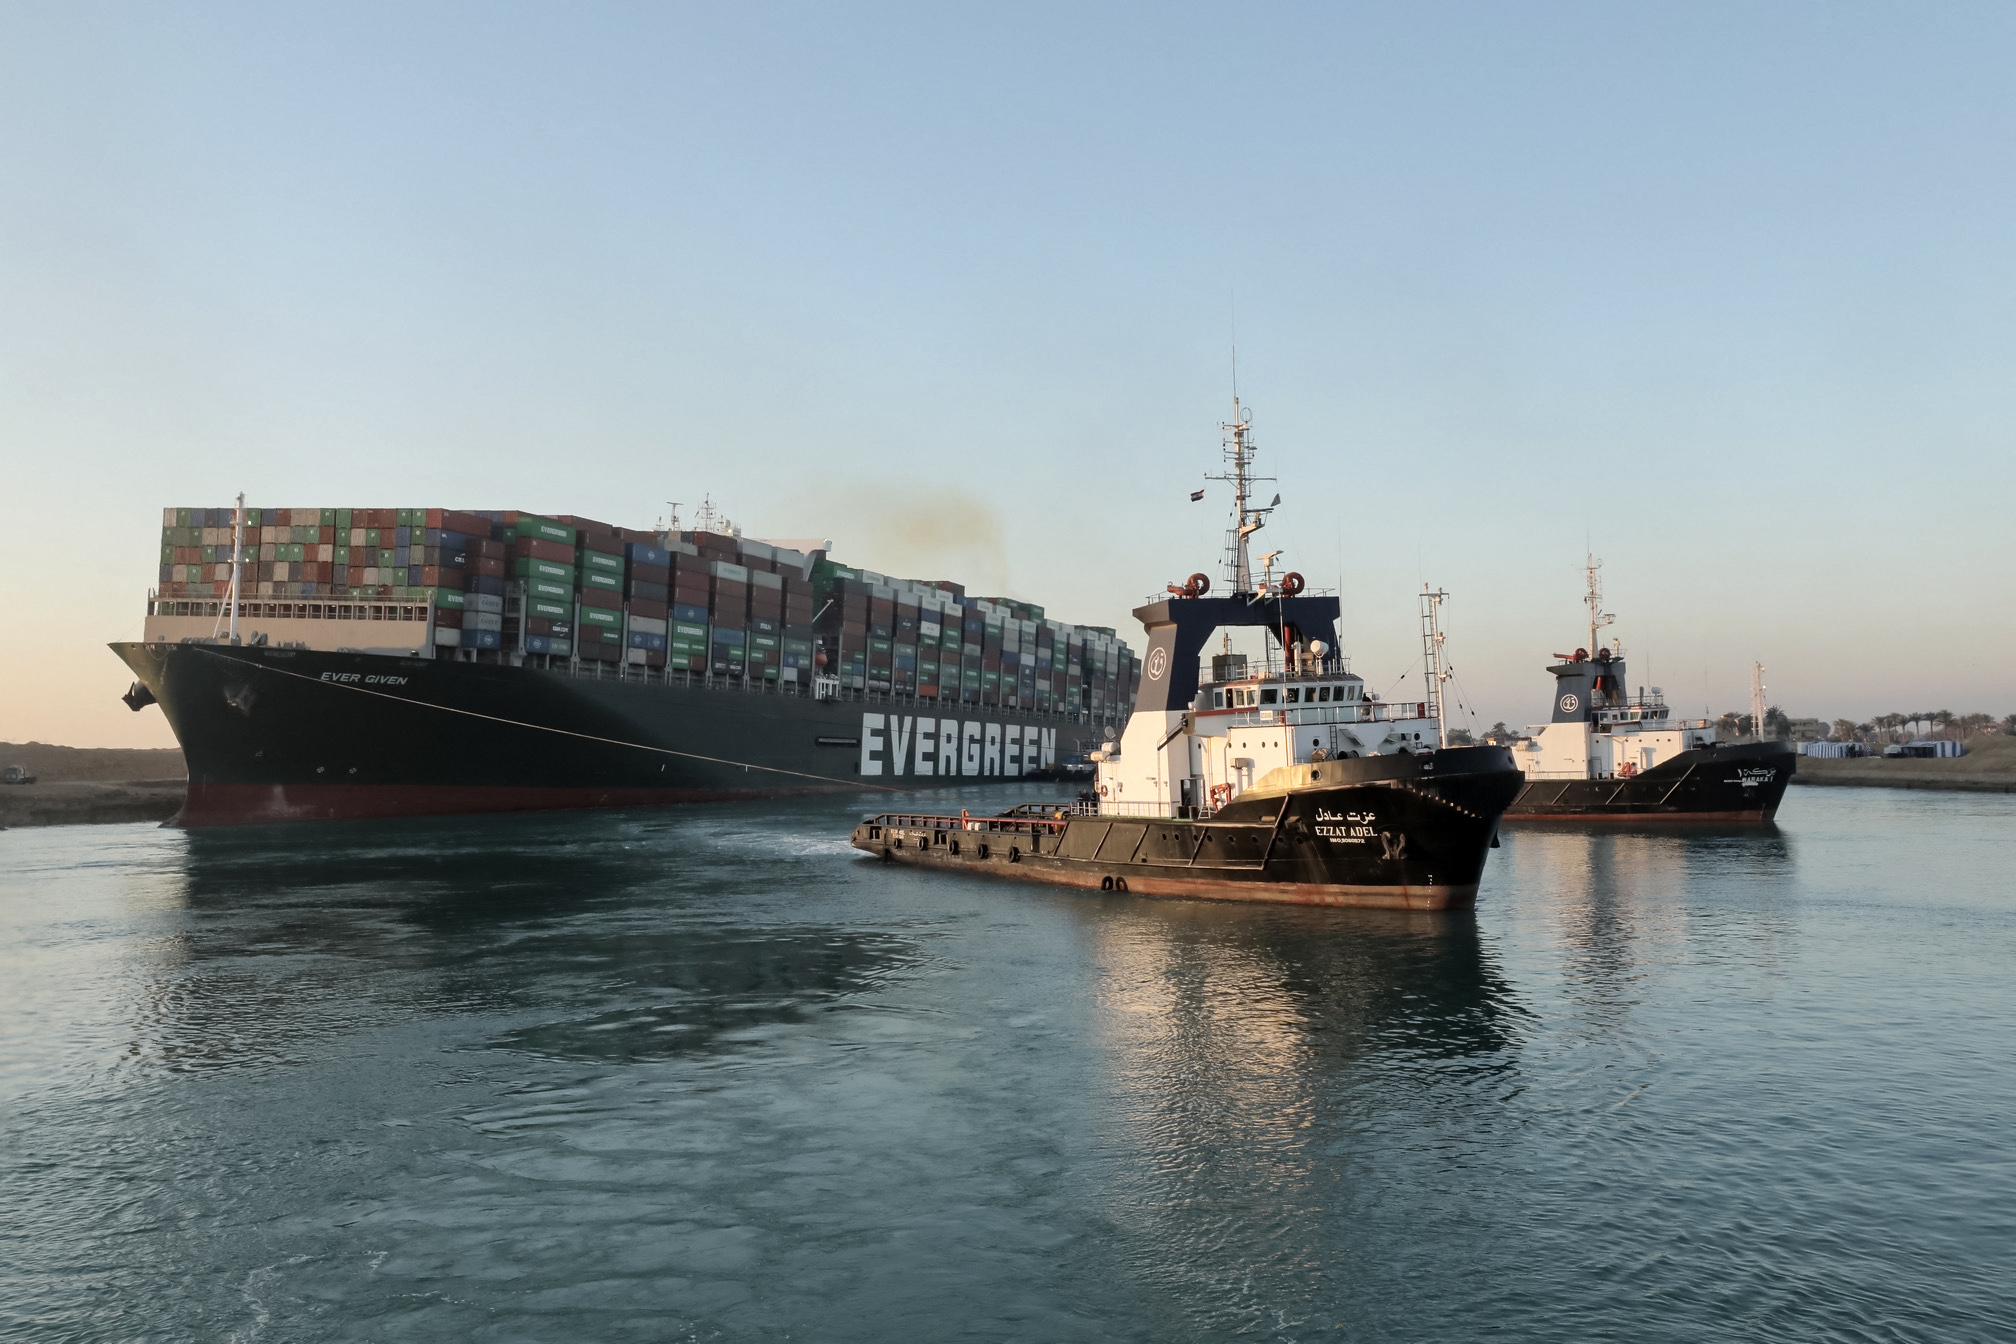 PHOTO: Tugboats are seen pulling the "Ever Given" container ship stuck sideways across Egypt's Suez Canal in this handout photo released by the Suez Canal Authority on March 29, 2021.